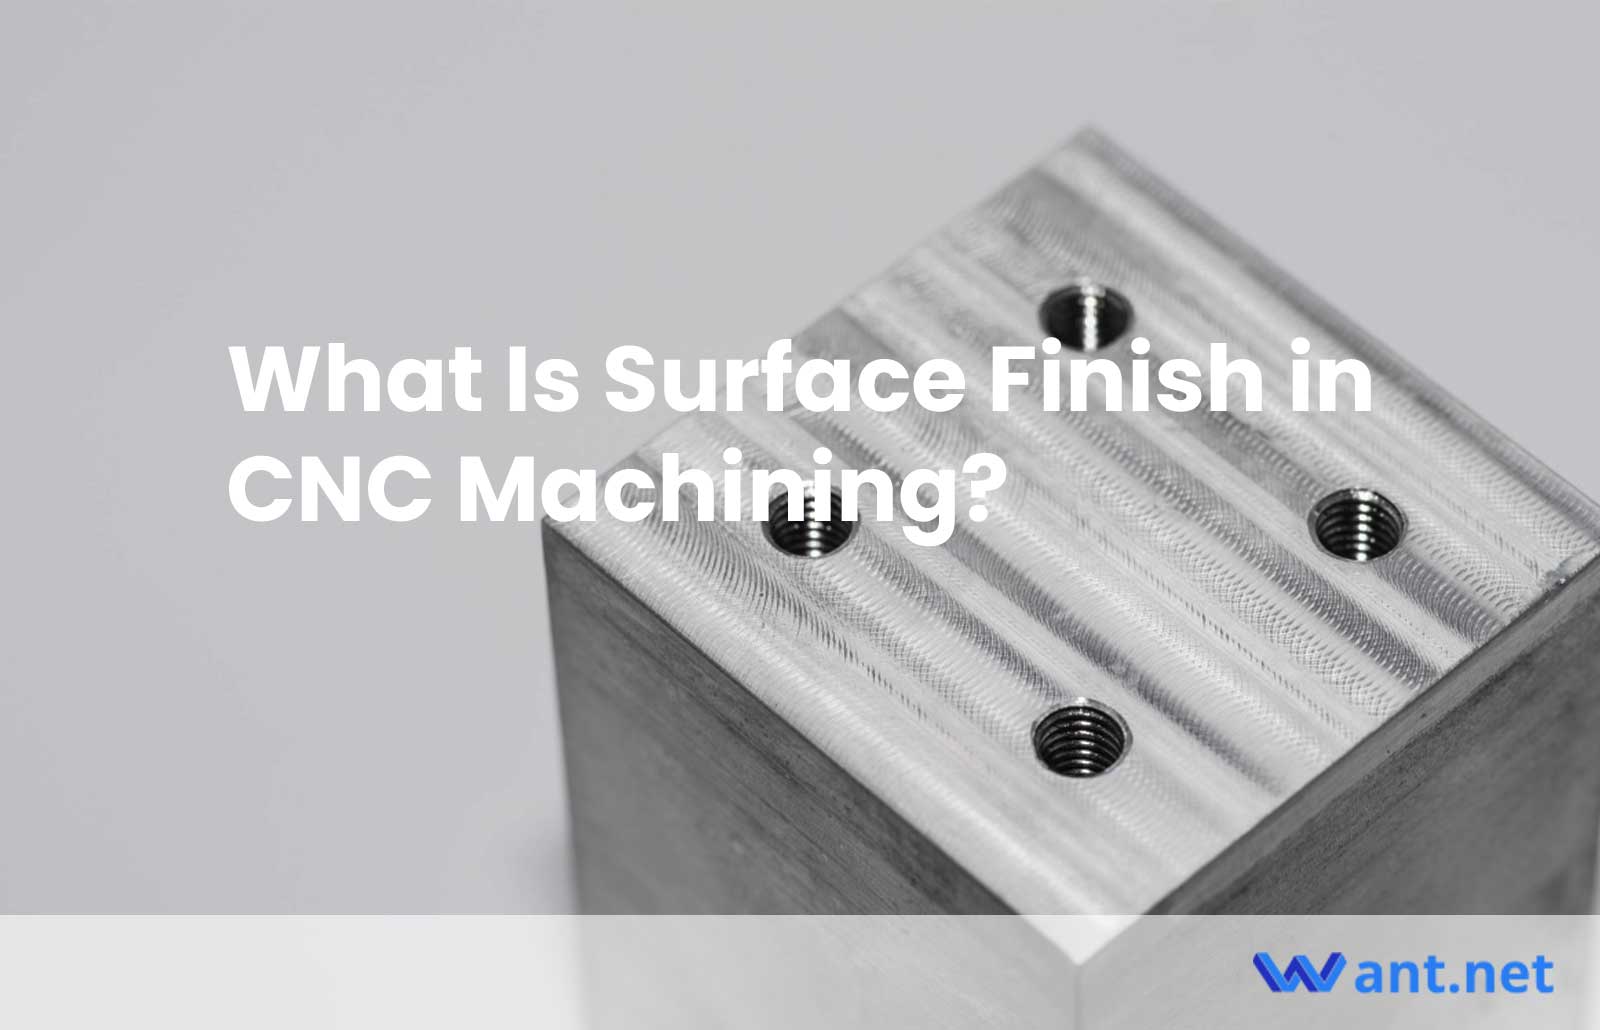 What Is Surface Finish in CNC Machining?